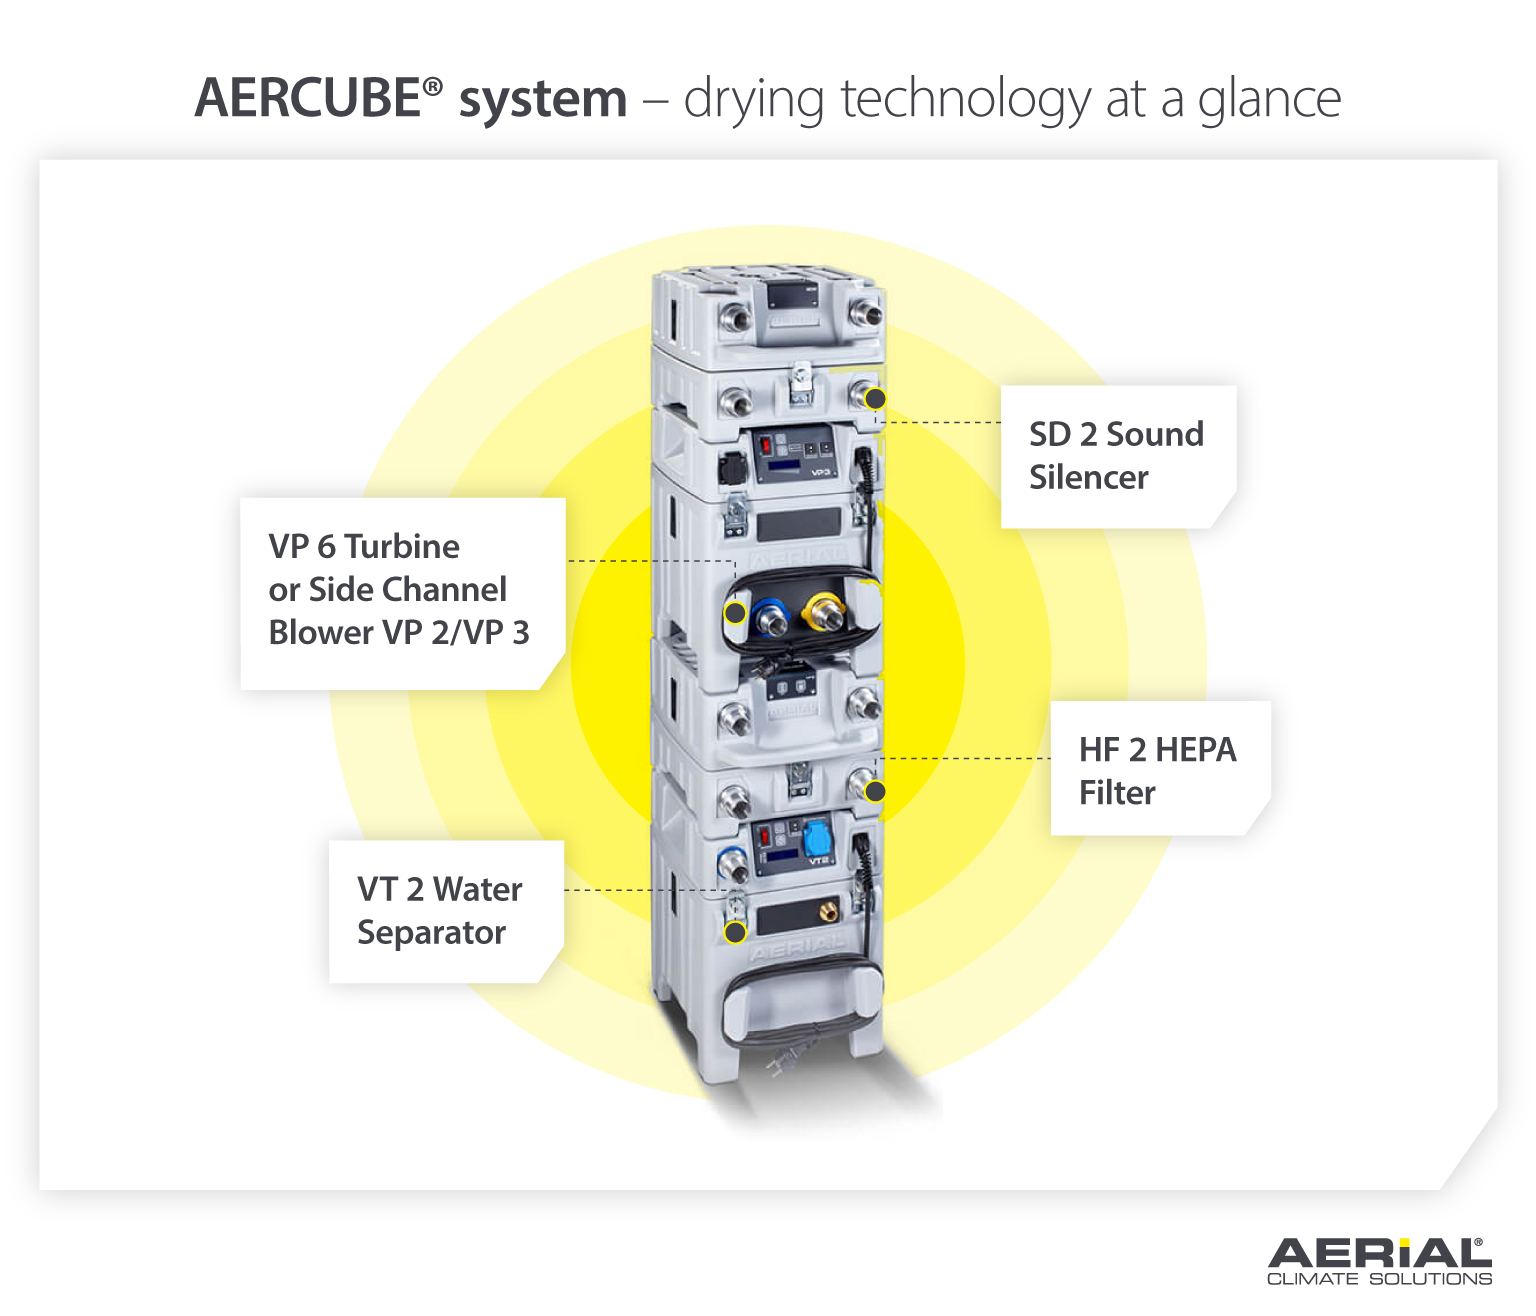 Aercube drying technology system by Aerial Climate Solutions - Infographic image